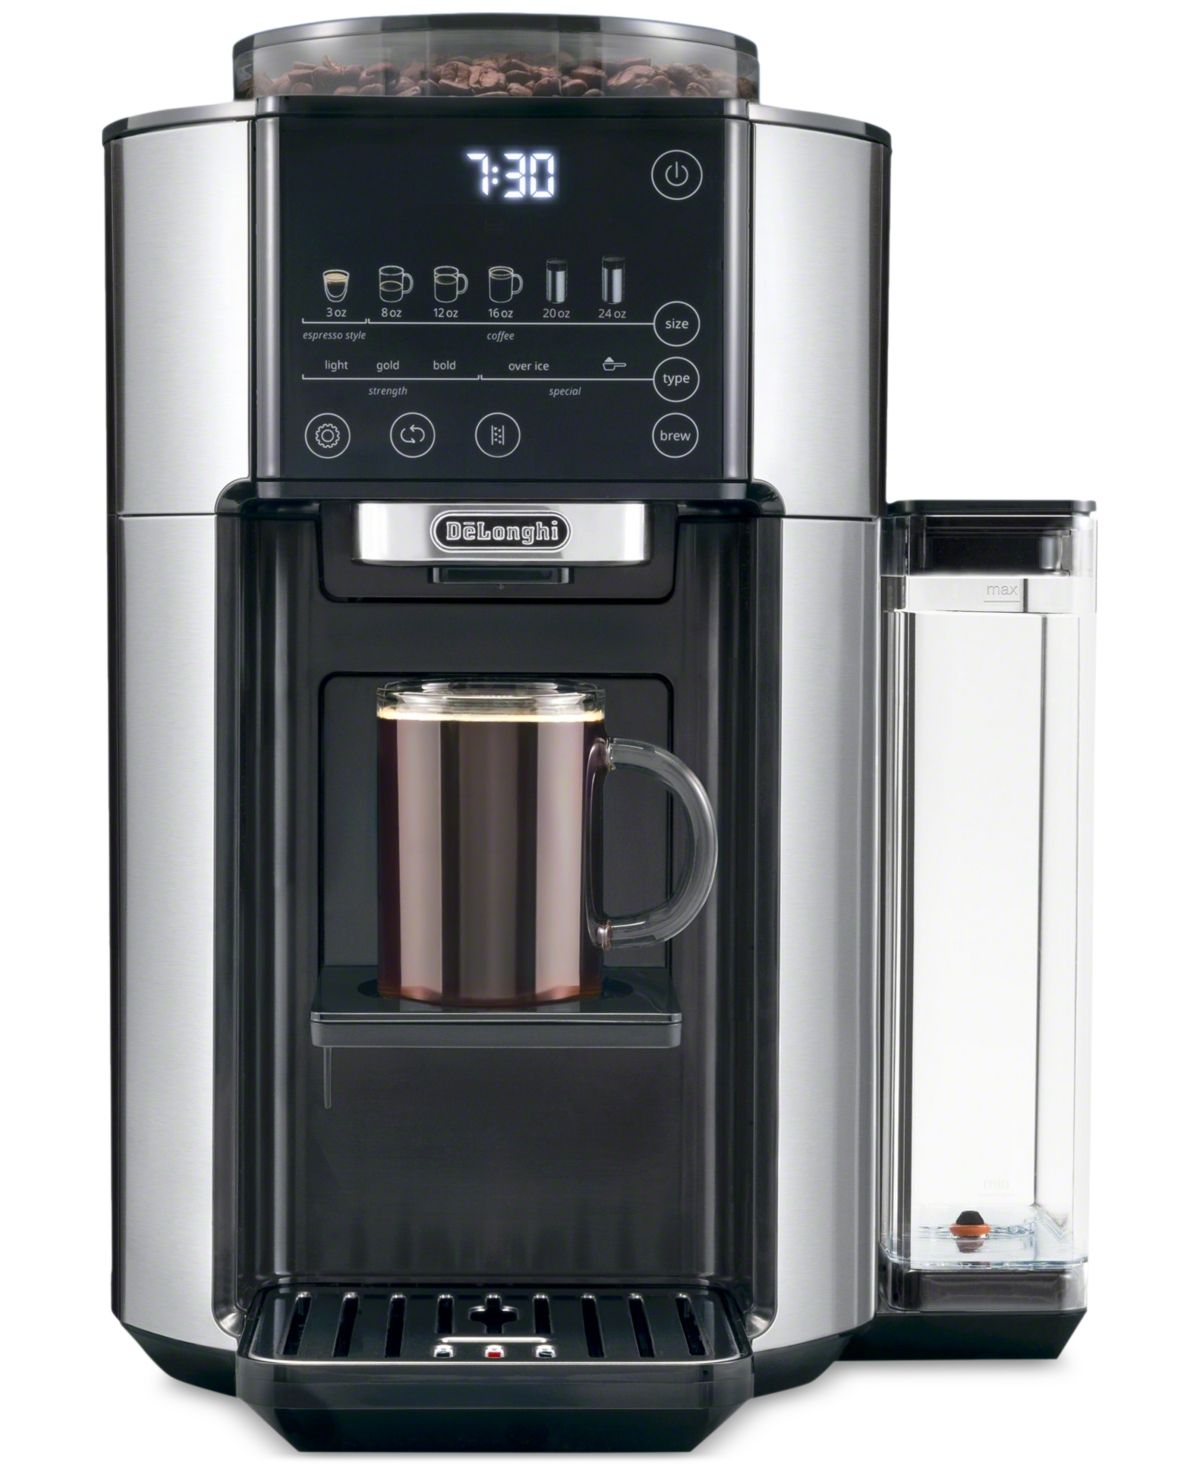 De'Longhi TrueBrew Automatic Coffee Maker with Bean Extract Technology | Macys (US)